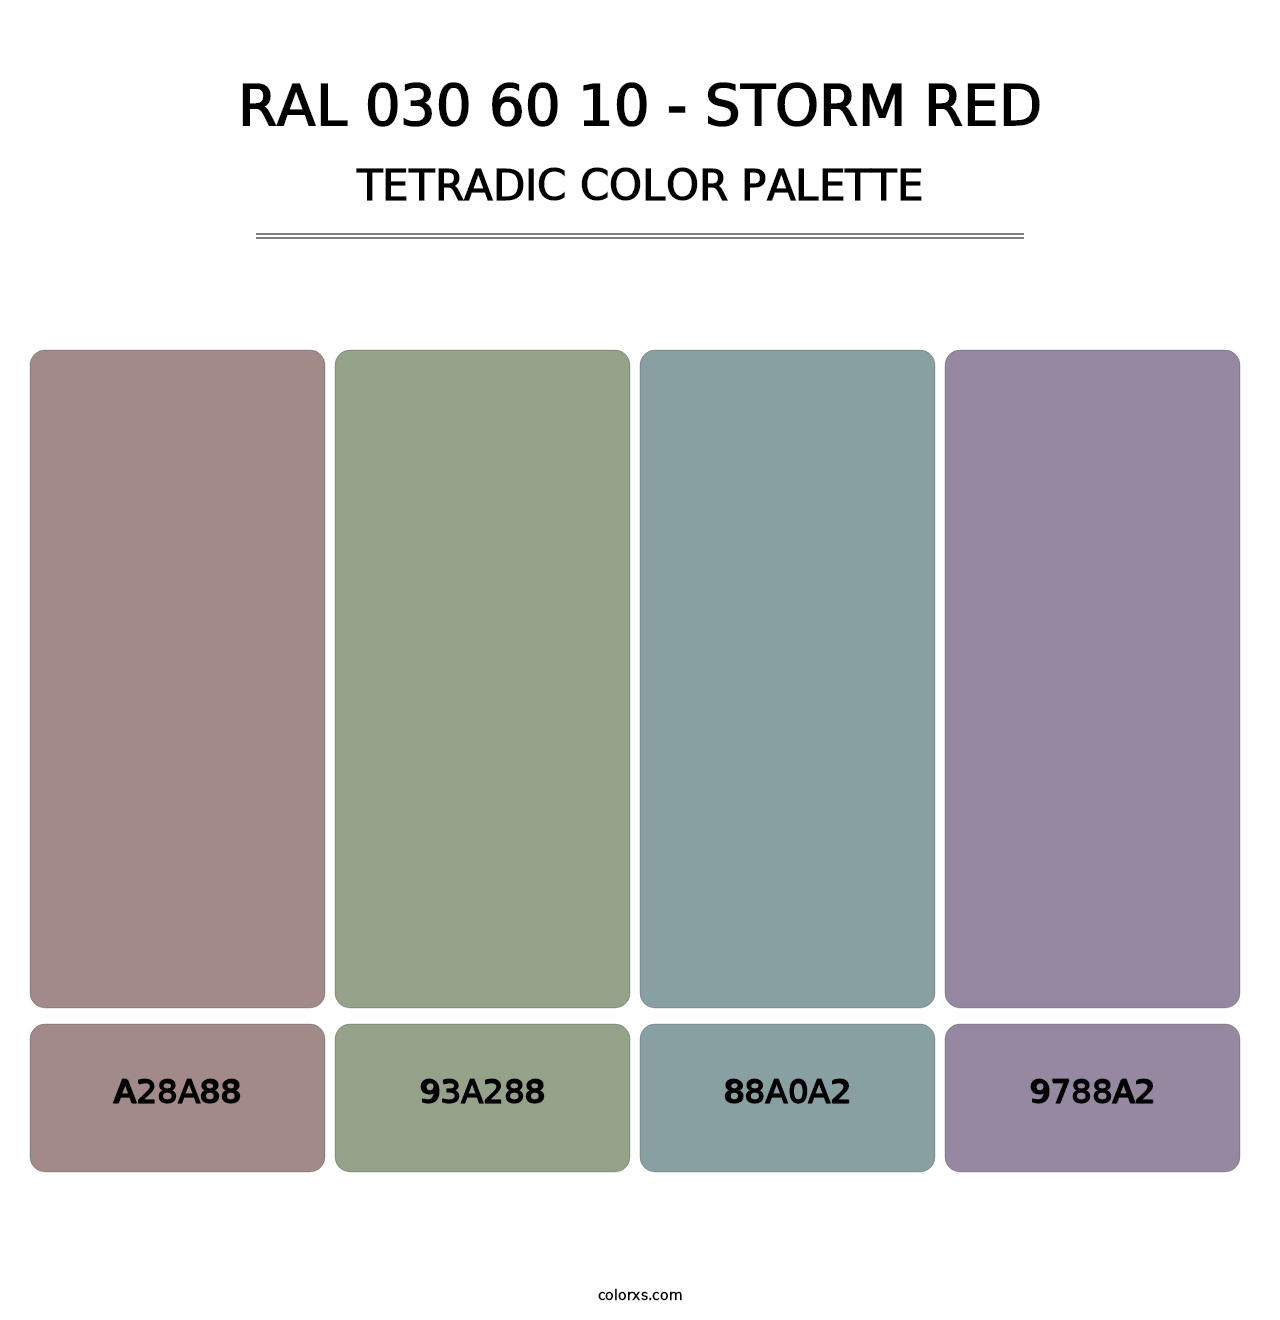 RAL 030 60 10 - Storm Red - Tetradic Color Palette